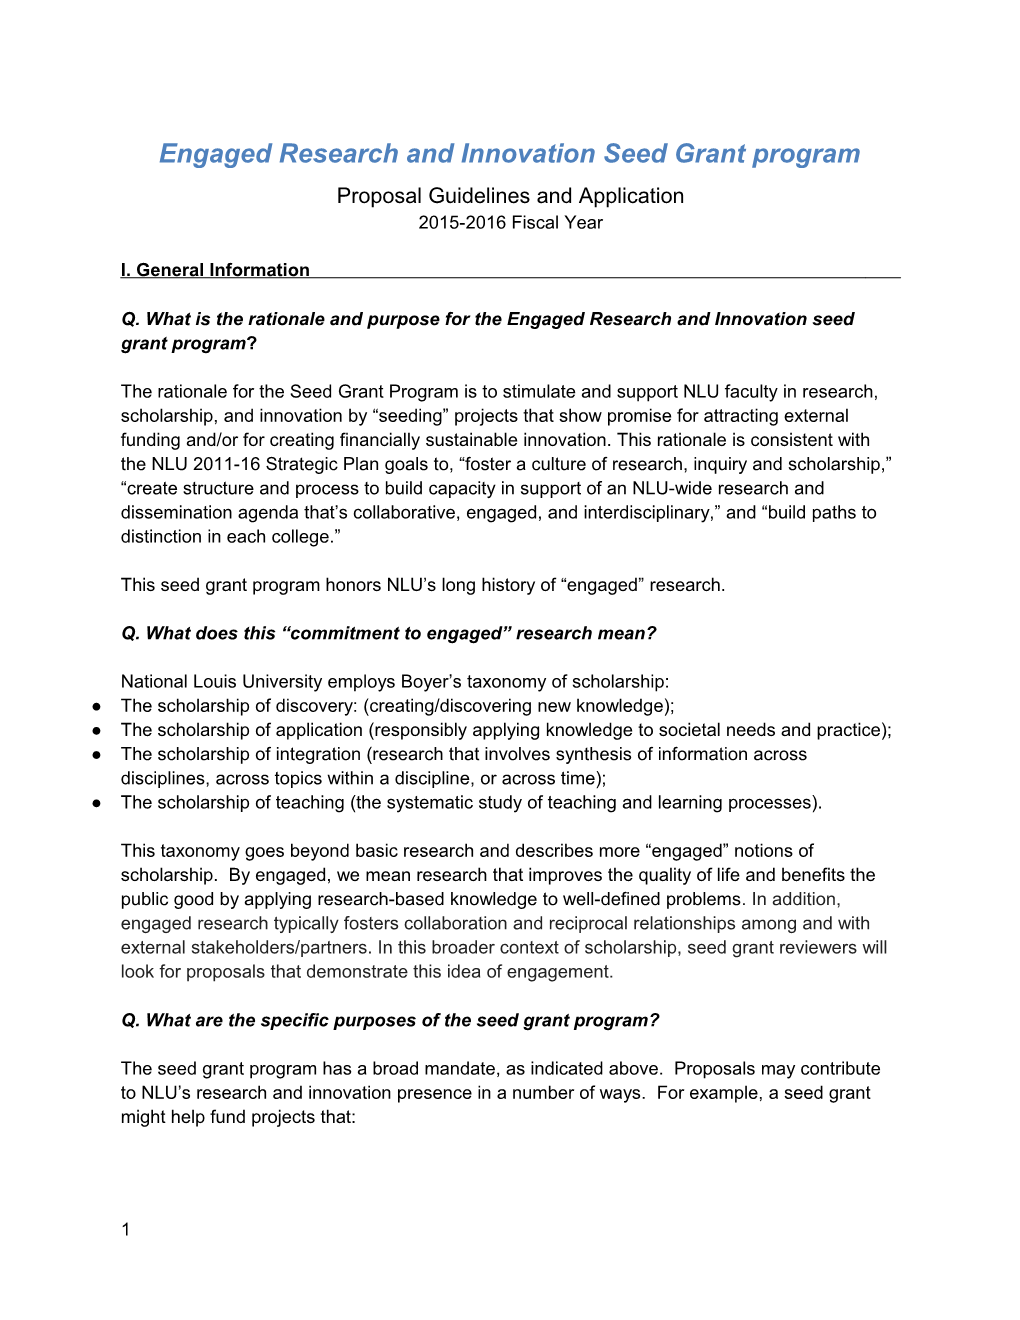 Engaged Research and Innovation Seed Grant Program